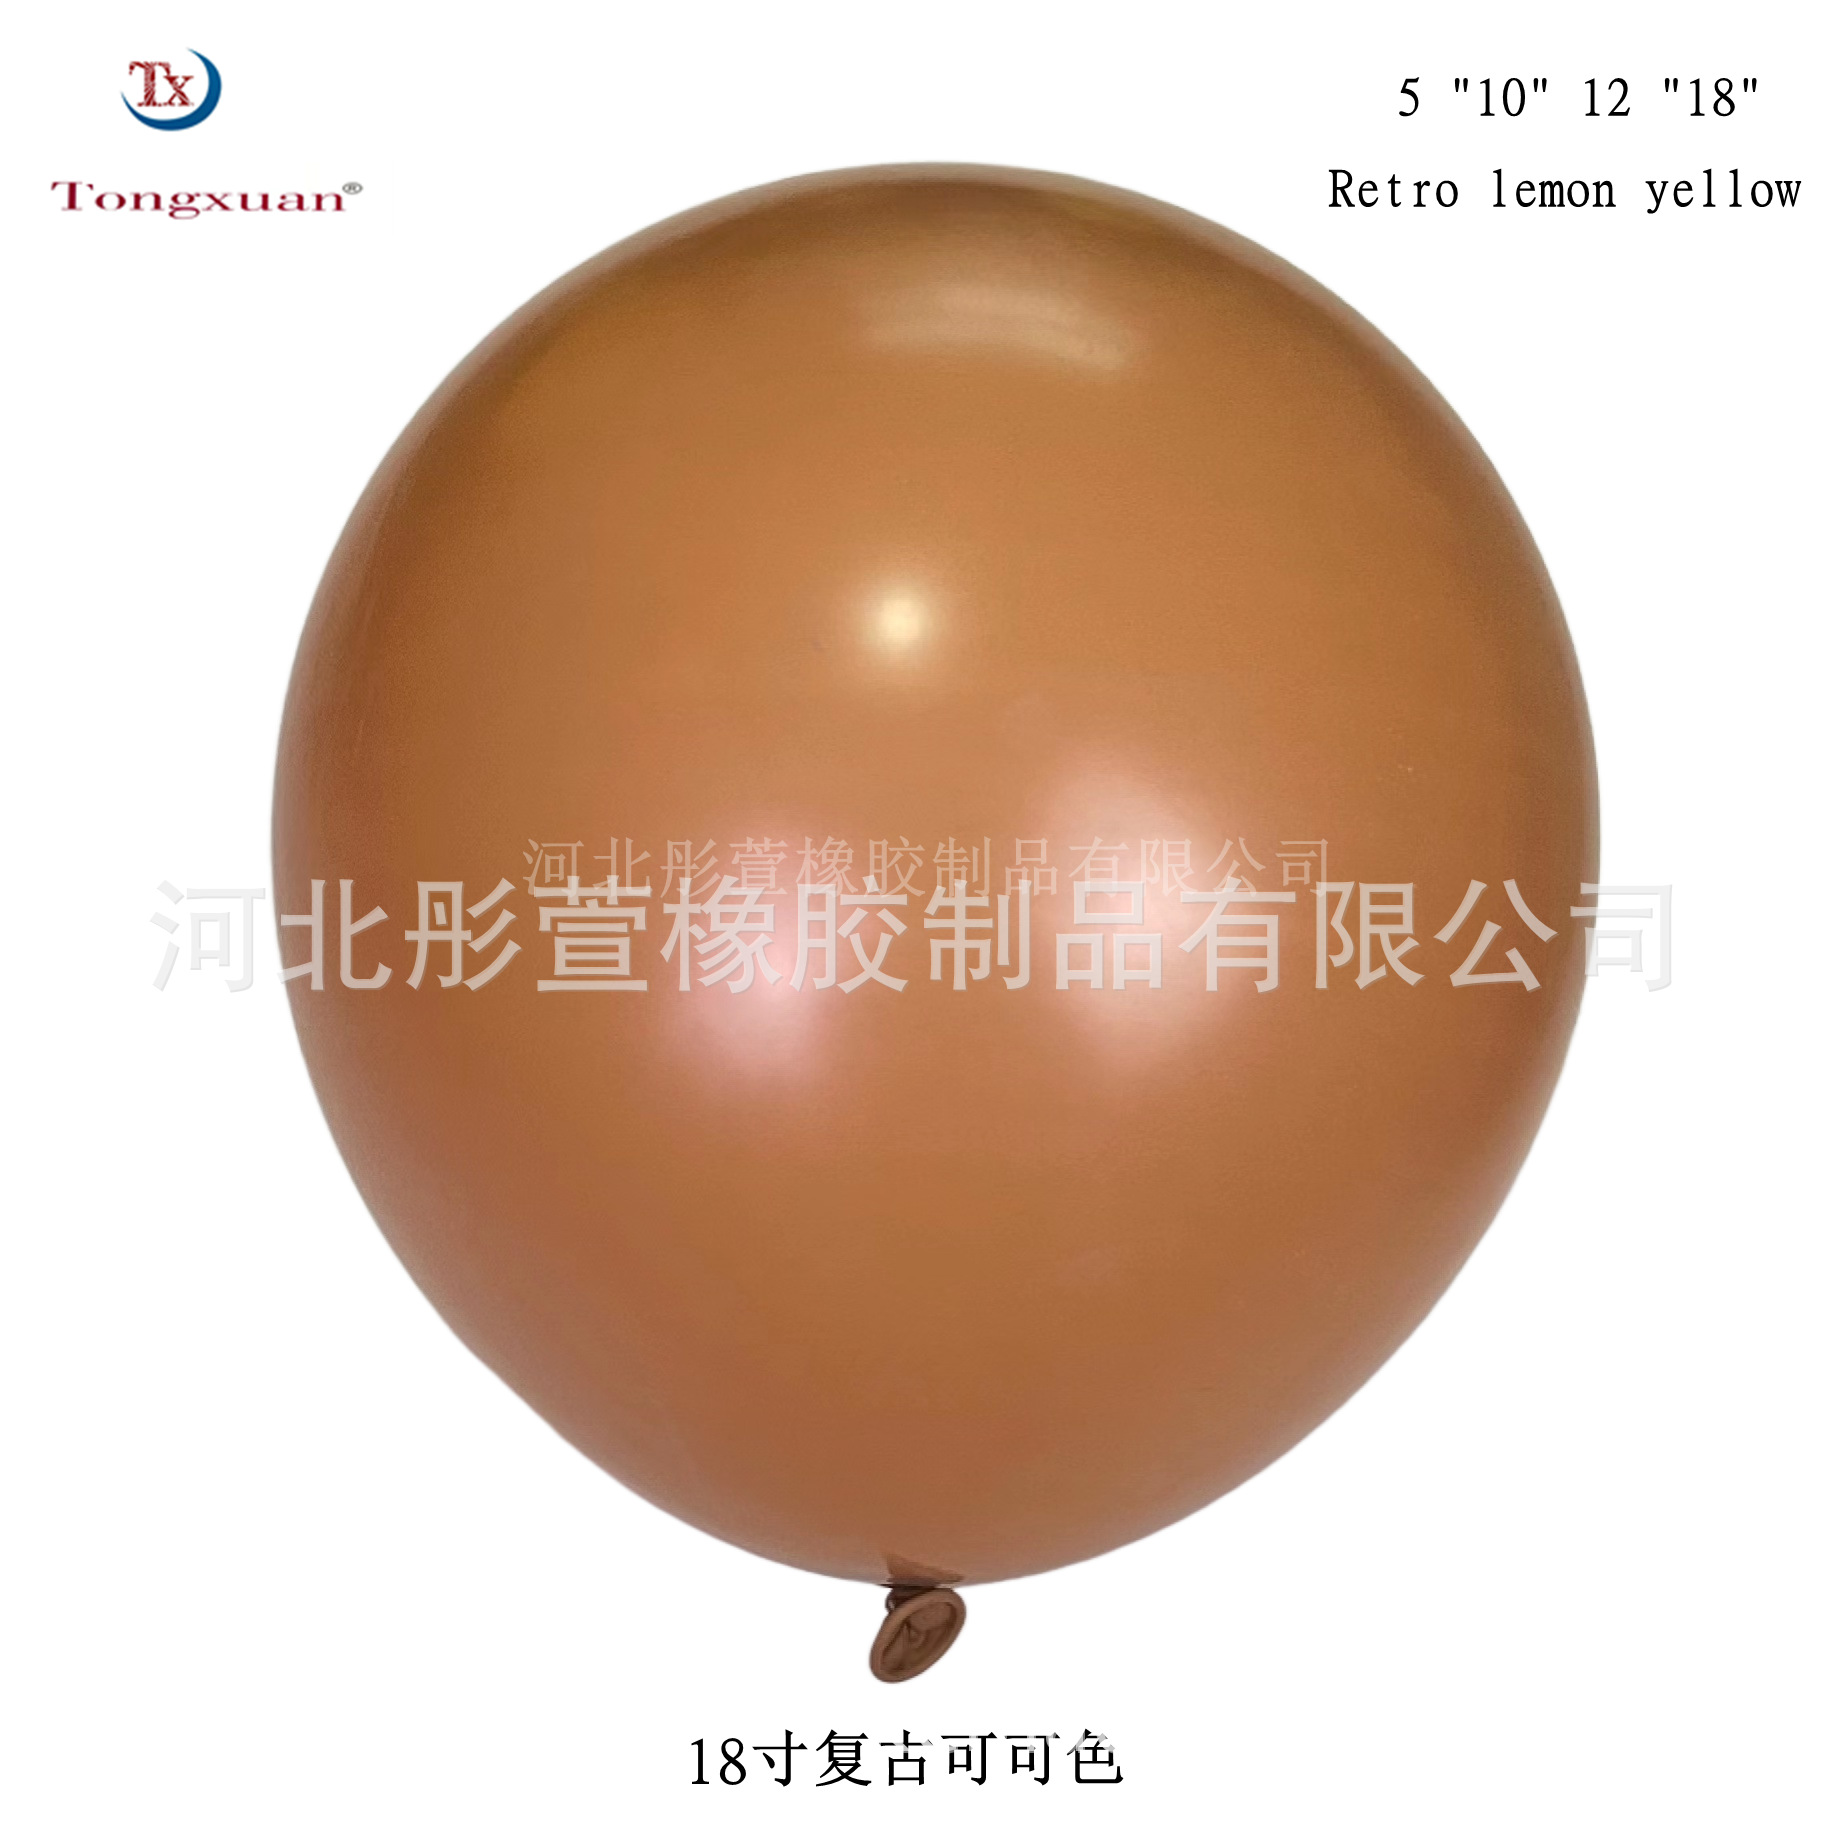 Tongxuan Retro Color Balloon 5-Inch 10-Inch 12-Inch 18-Inch Thick Retro Balloon Color Synchronization Large Quantity Price from